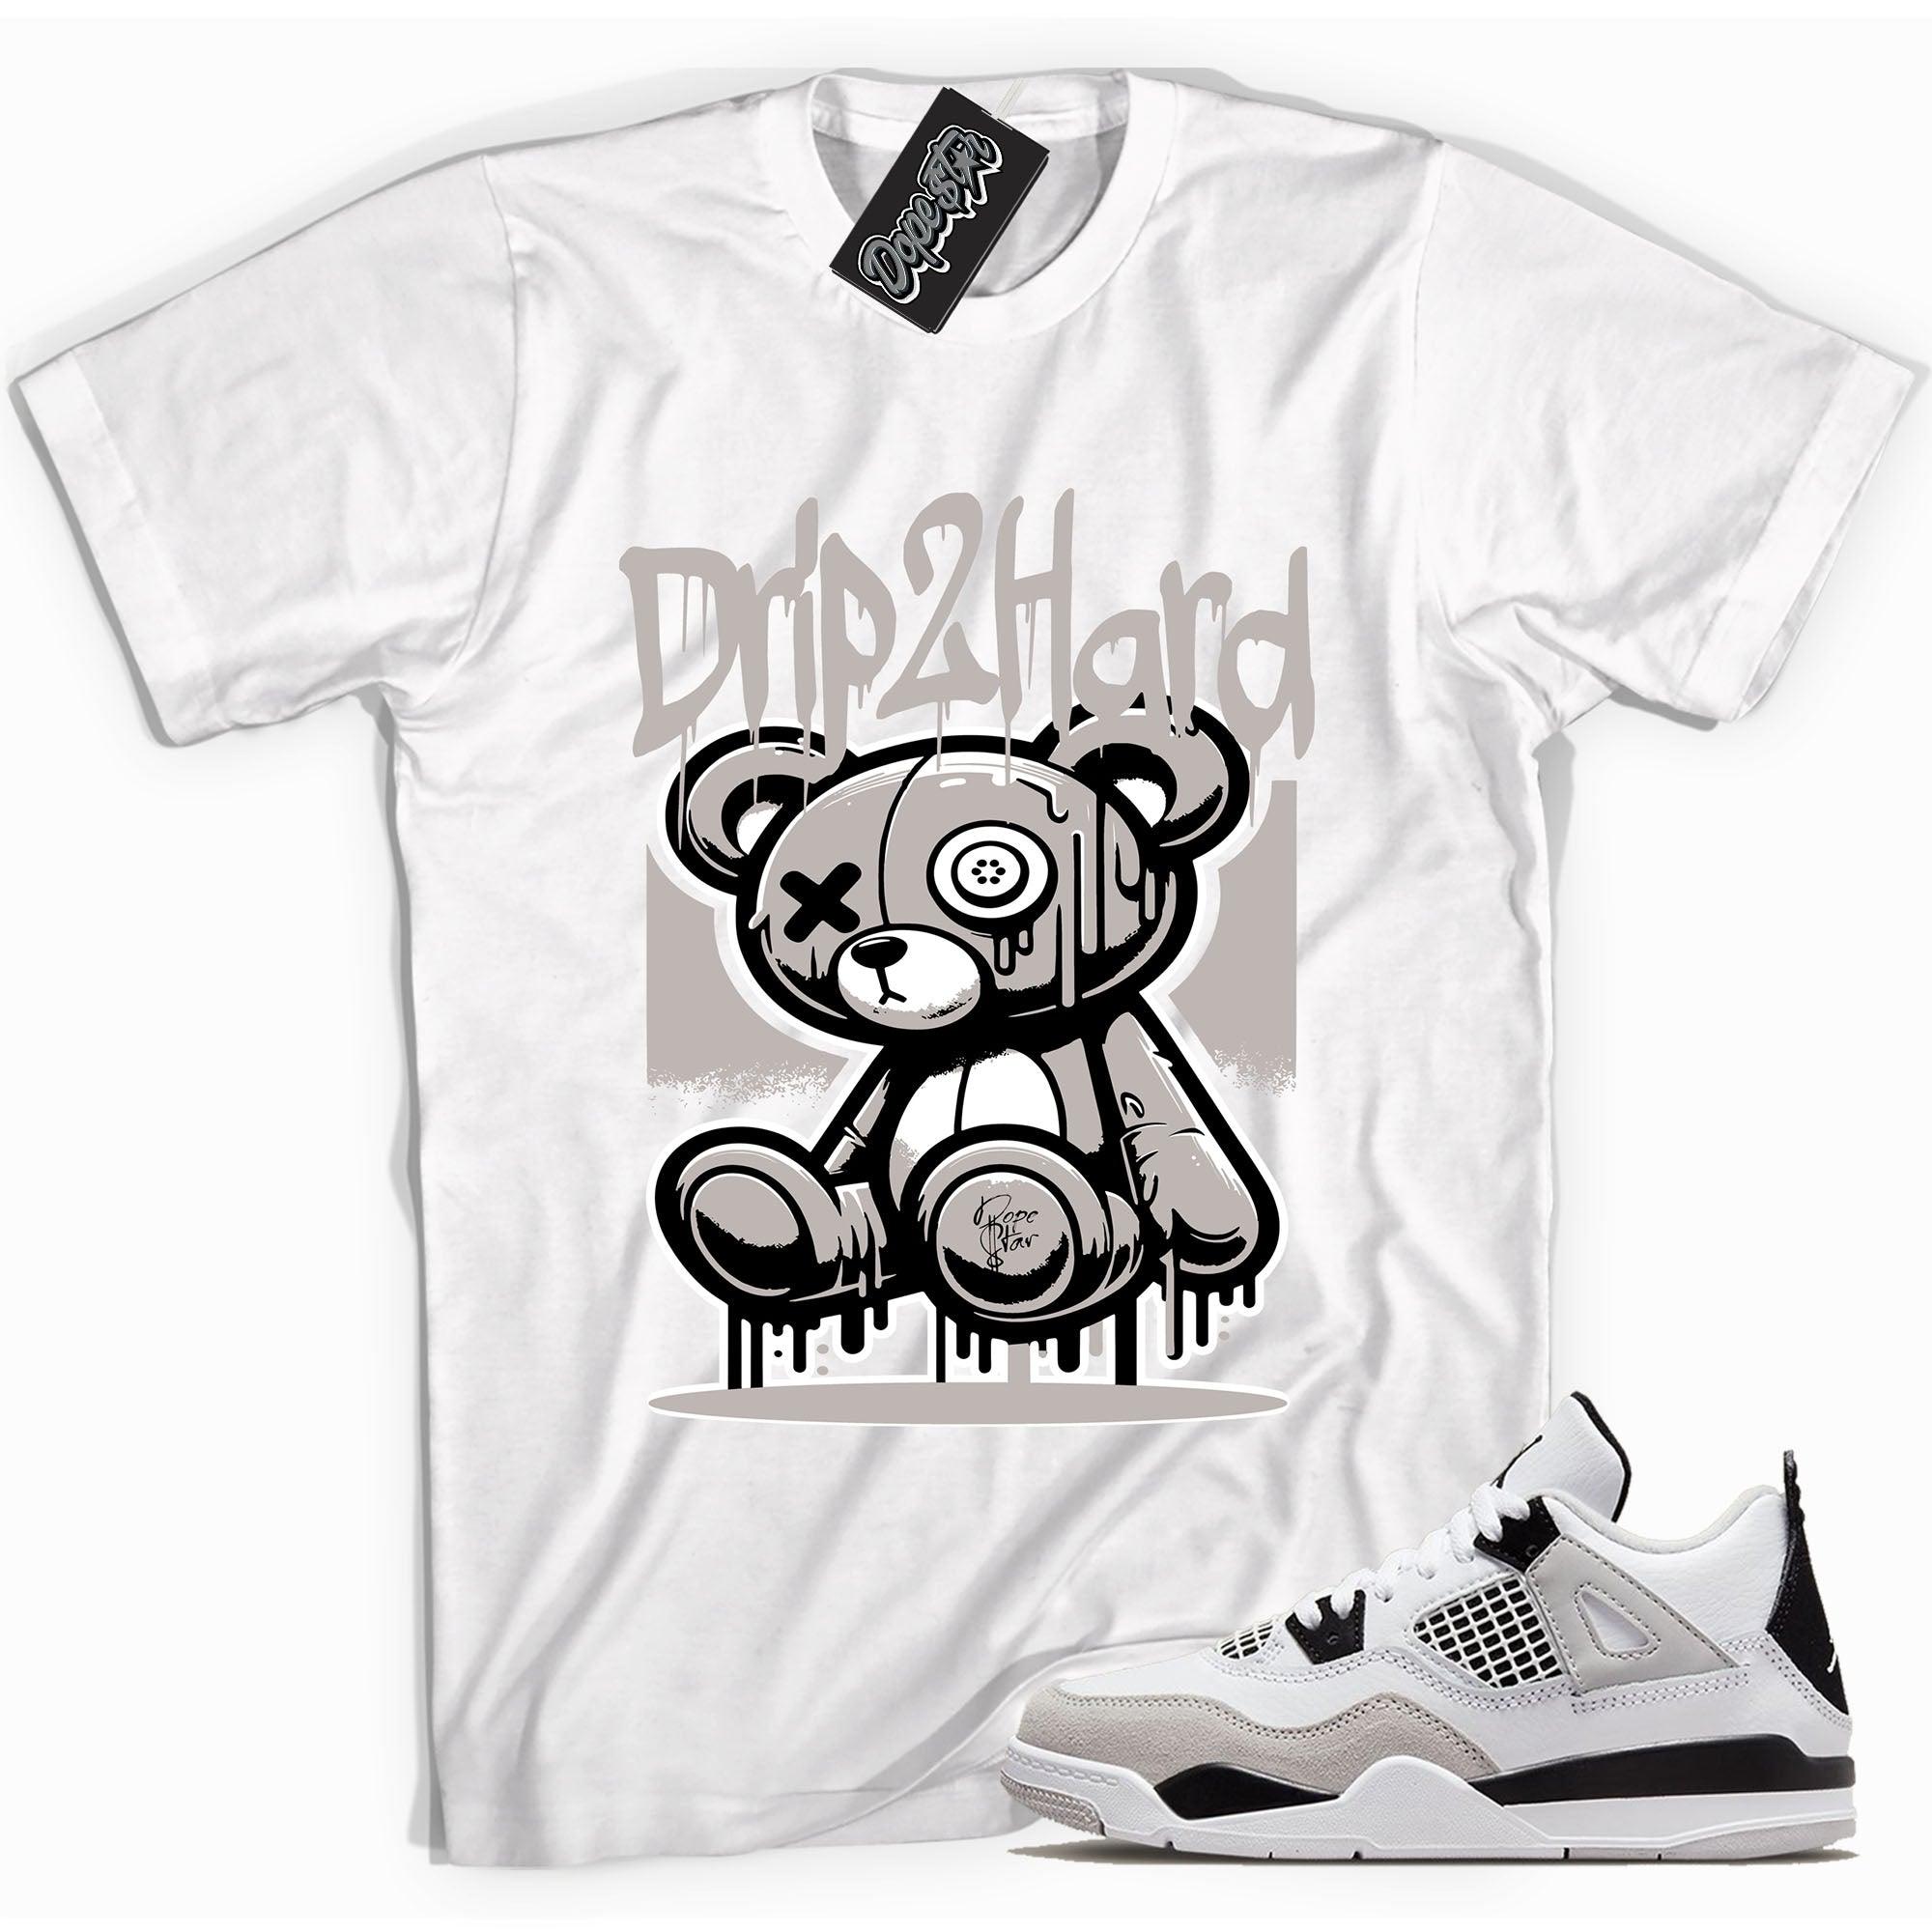 Cool White Shirt With Drip To Hard design That Perfectly Matches AIR JORDAN 4 RETRO MILITARY BLACK Sneakers.